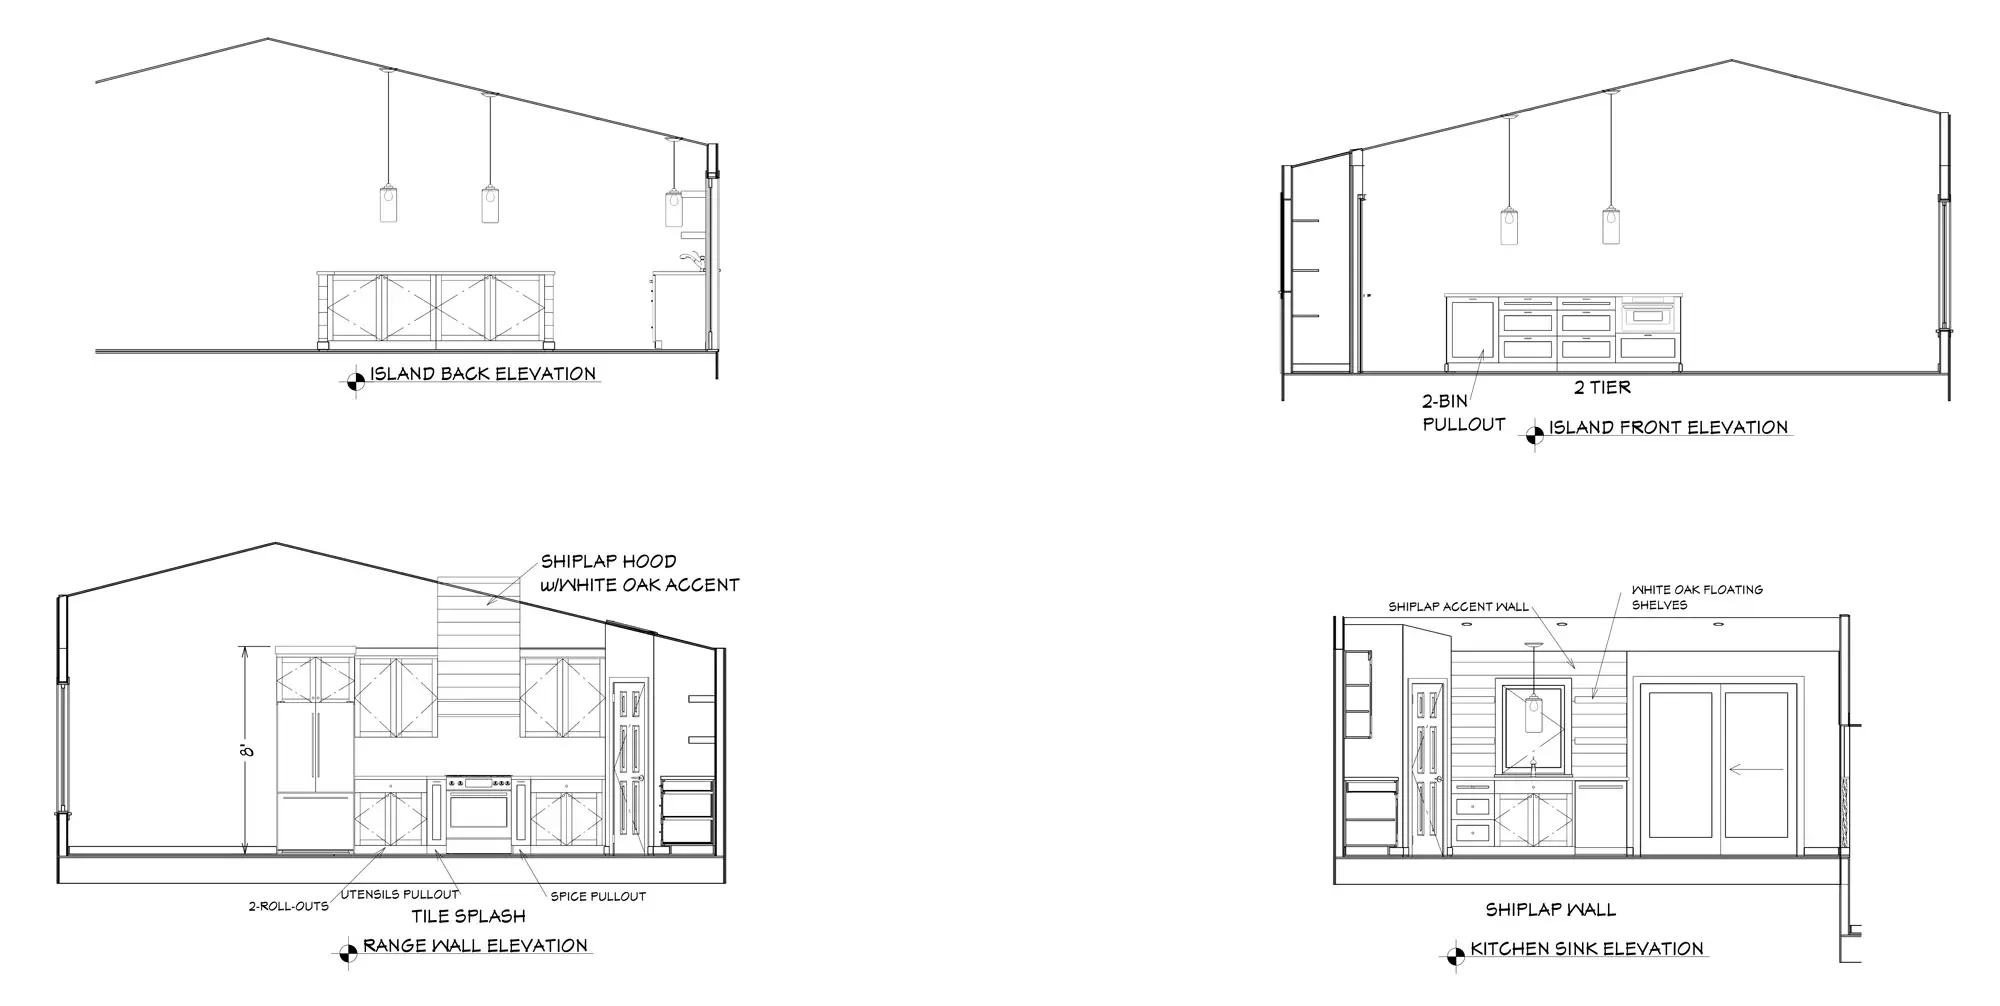 Island front and back, range wall, kitchen sink elevation plans